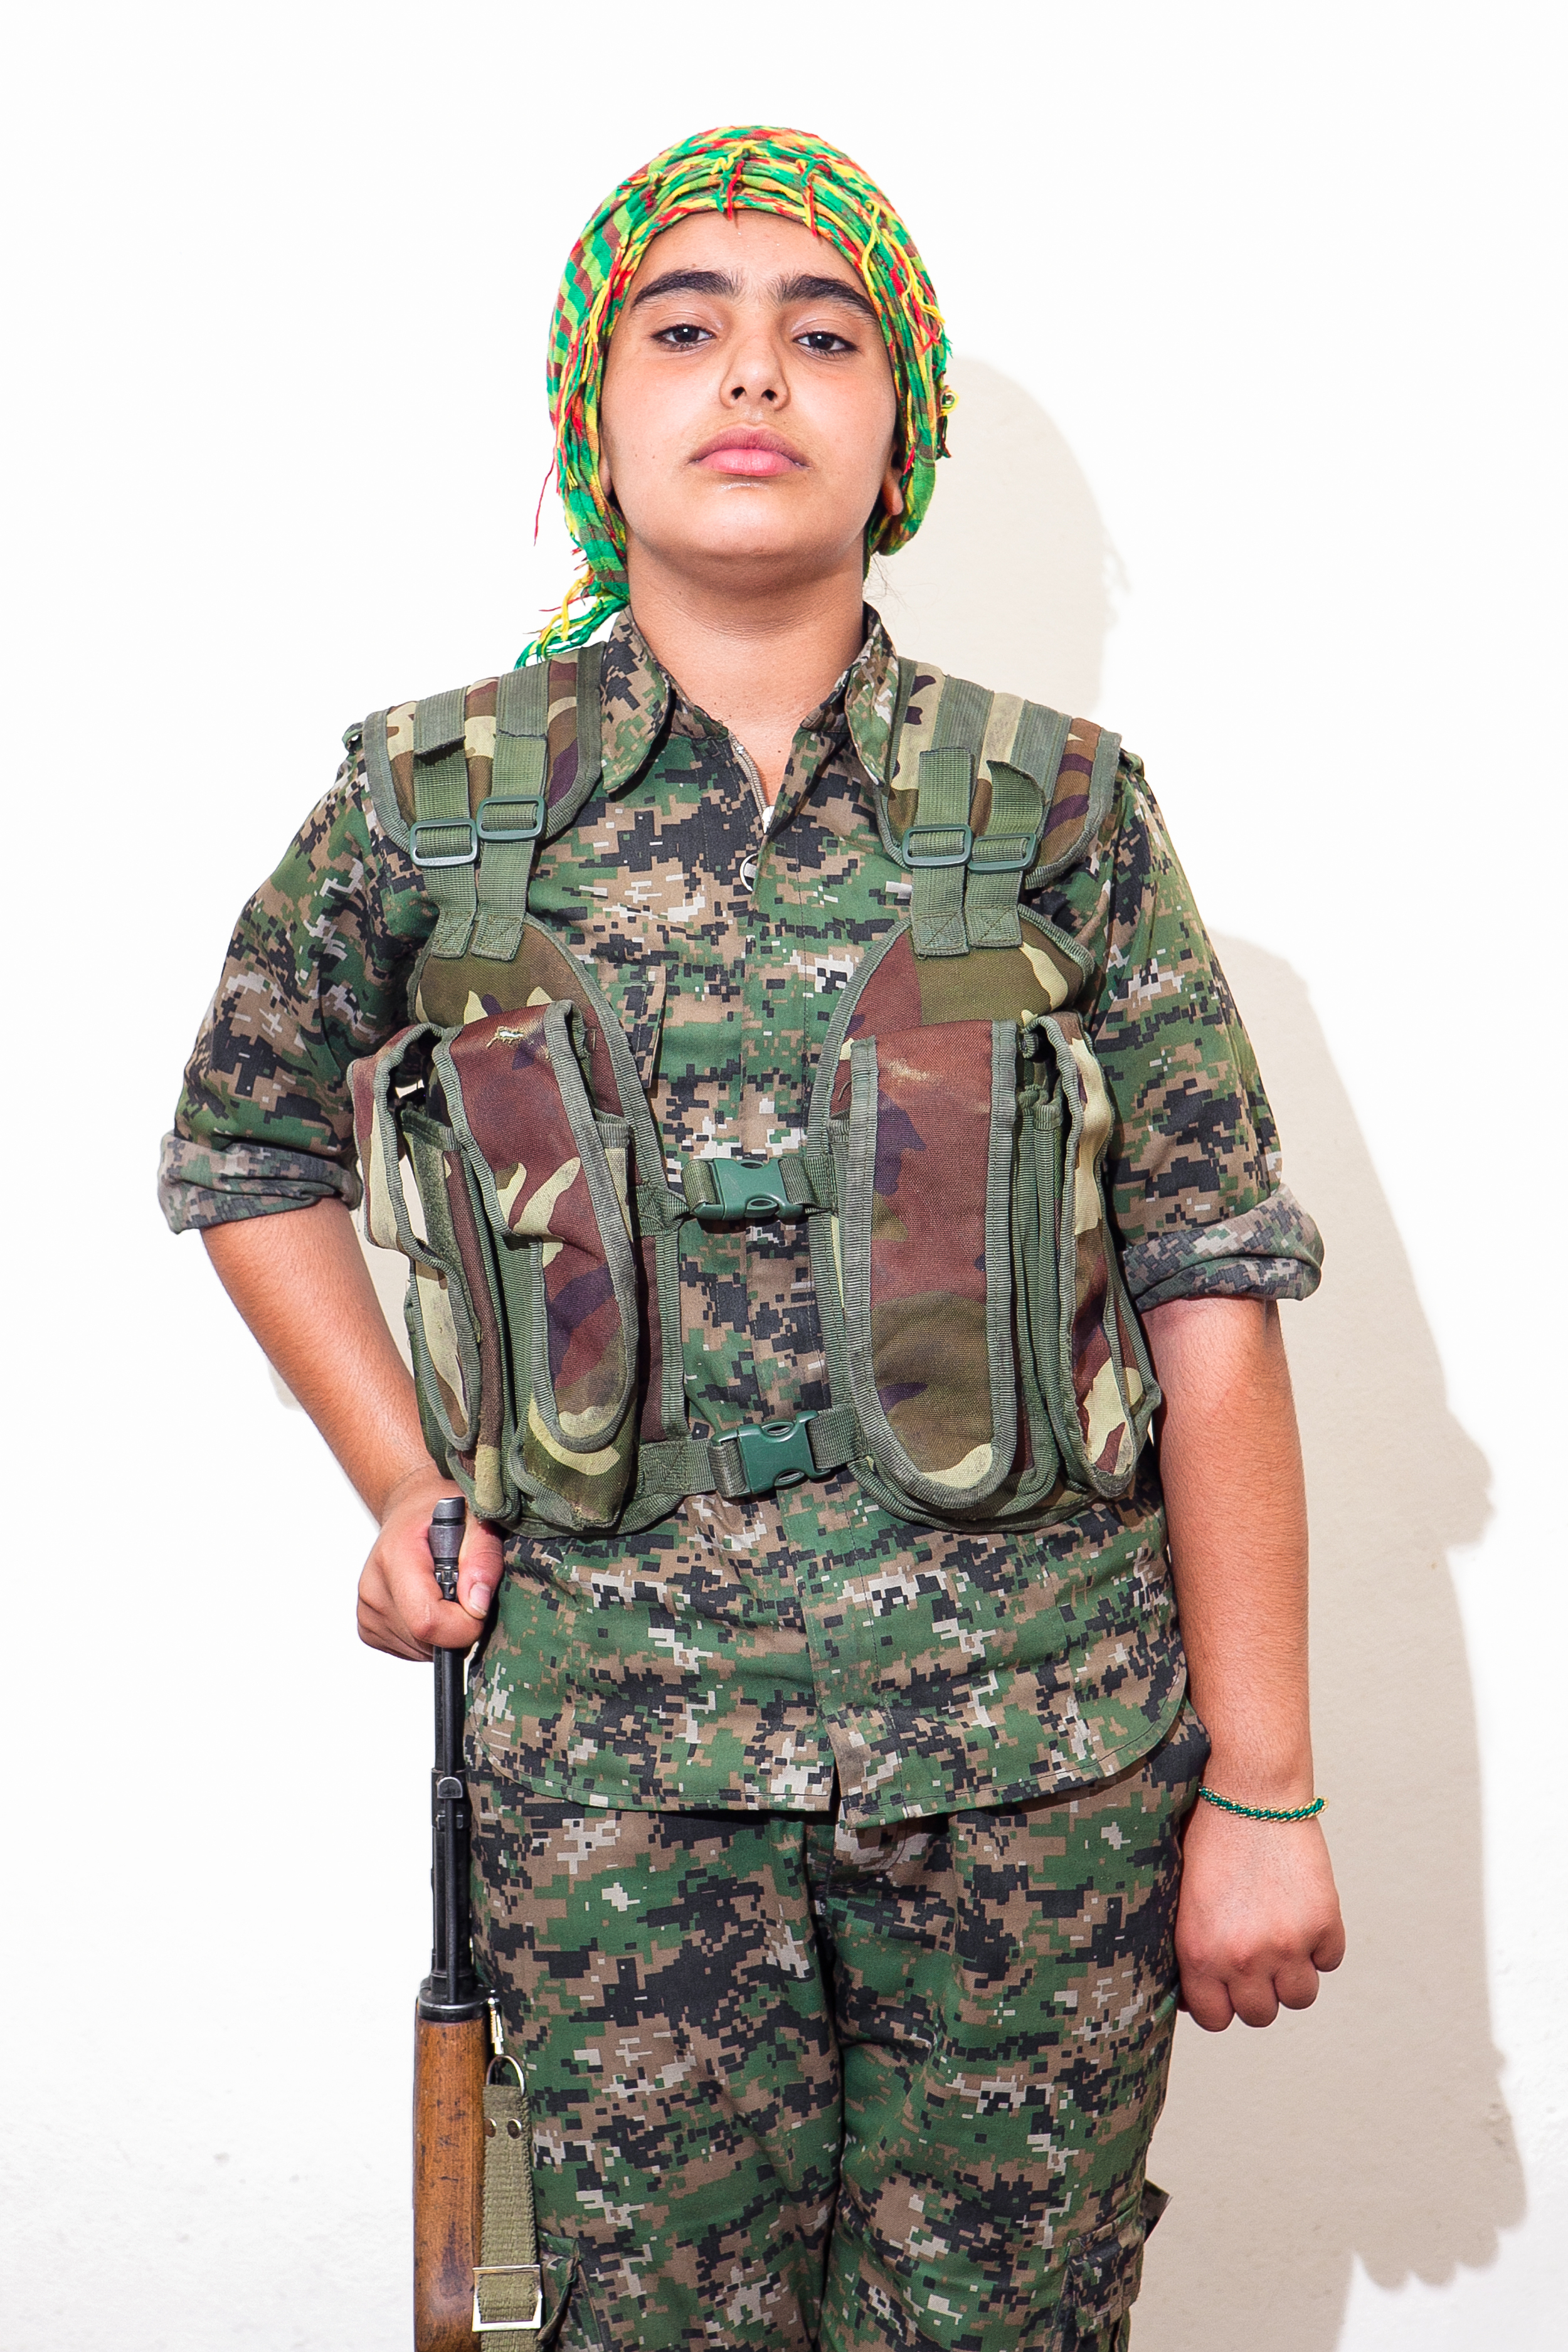  Hevedar Mohammed, 12.   “One day I went home and told my mother that I wanted to join the YPJ.  At first she said no, because I was too small, but she finally said I could.  My father said he was very proud of me. All of the soldiers tell me they lo